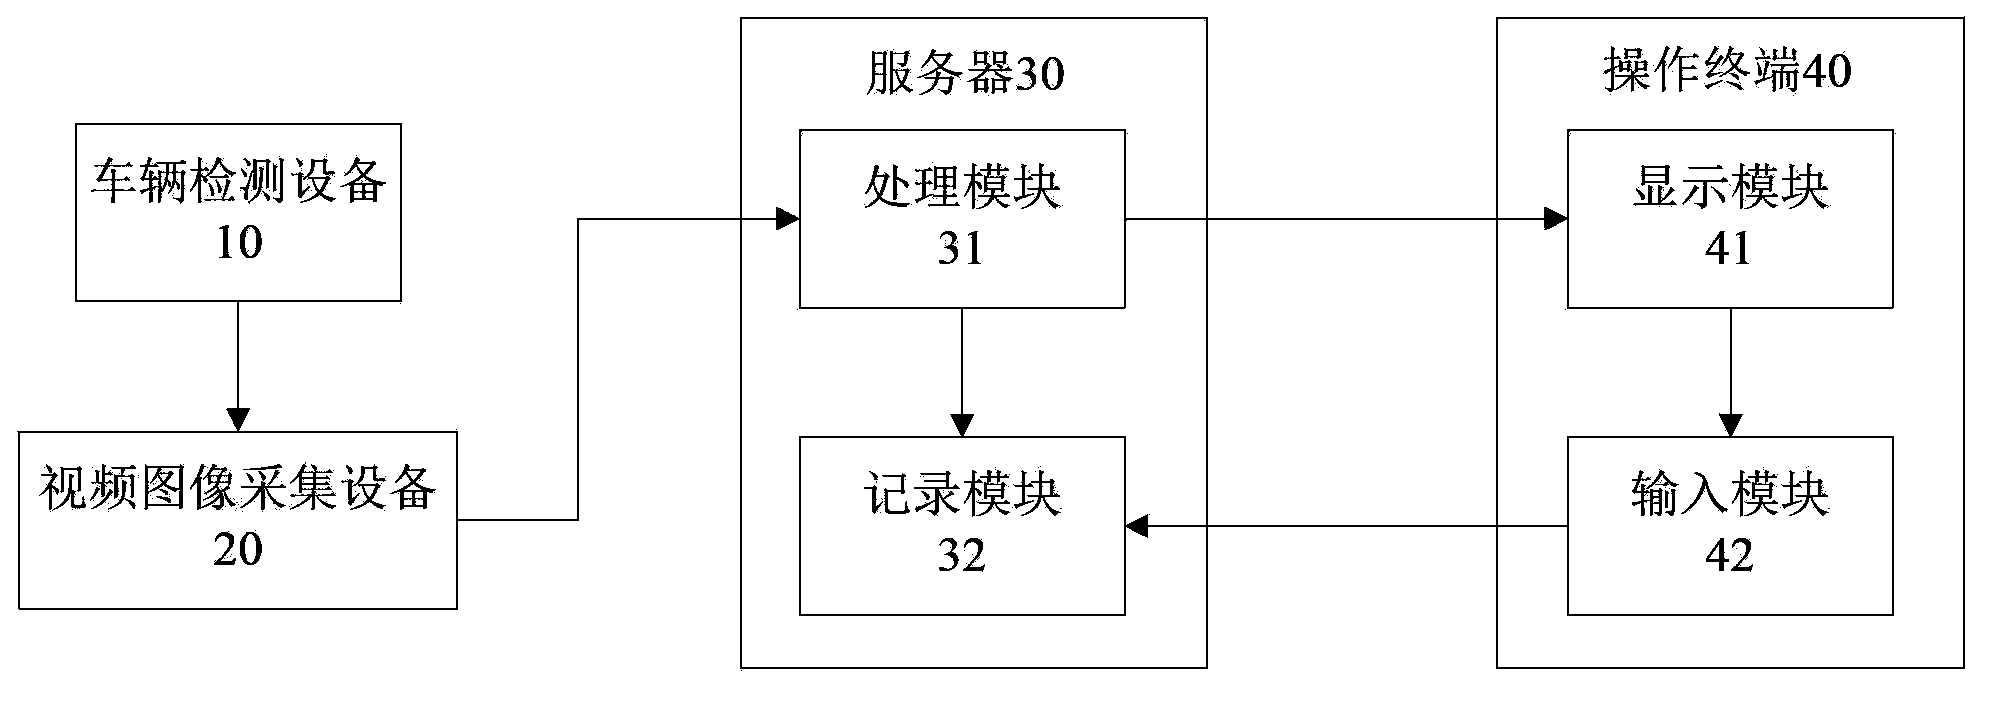 Vehicle license plate recognition method and system